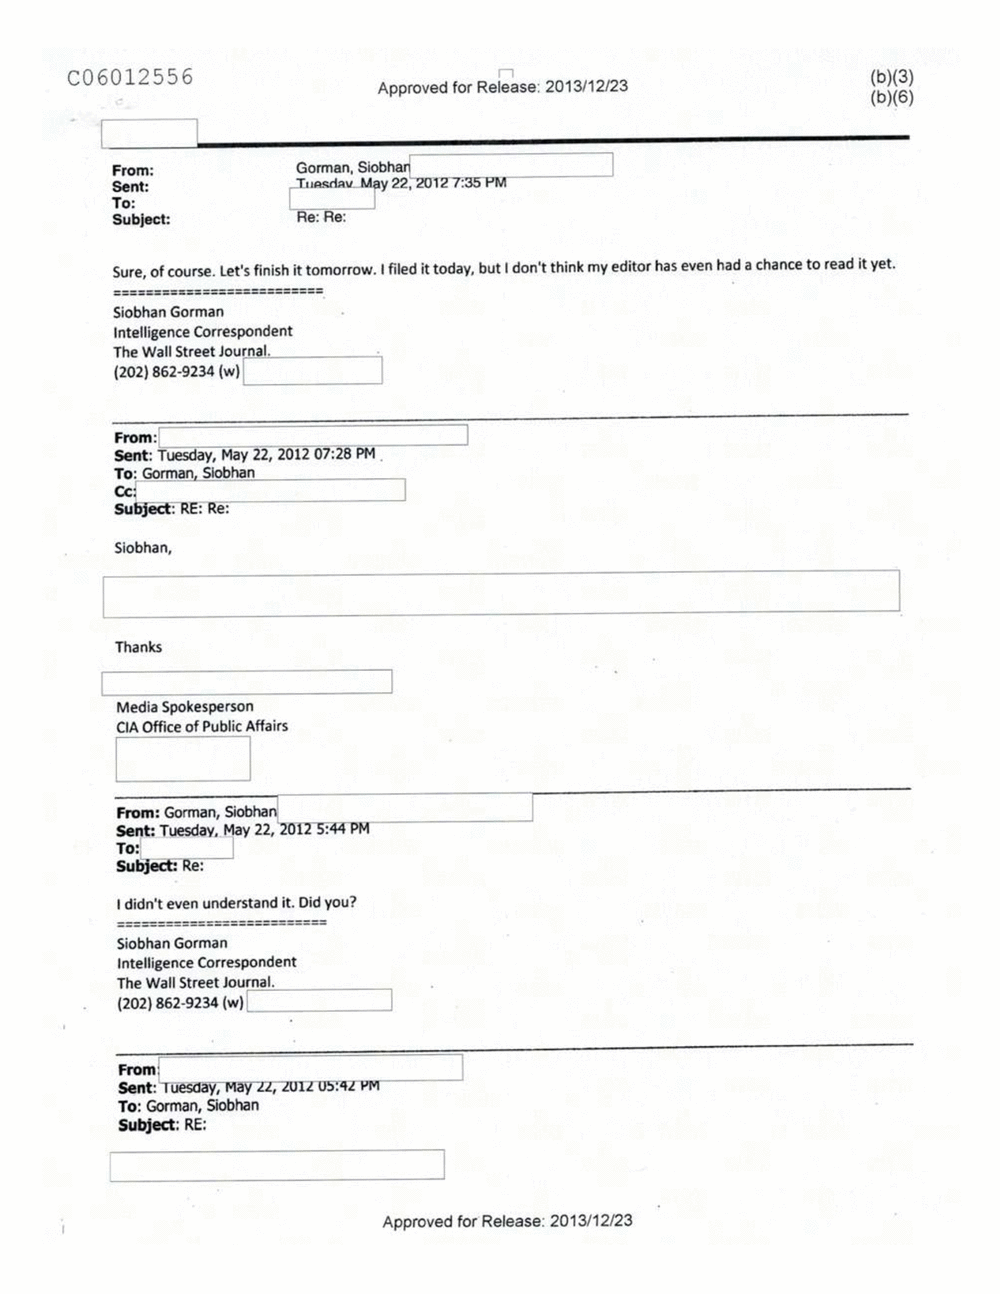 Page 156 from Email Correspondence Between Reporters and CIA Flacks